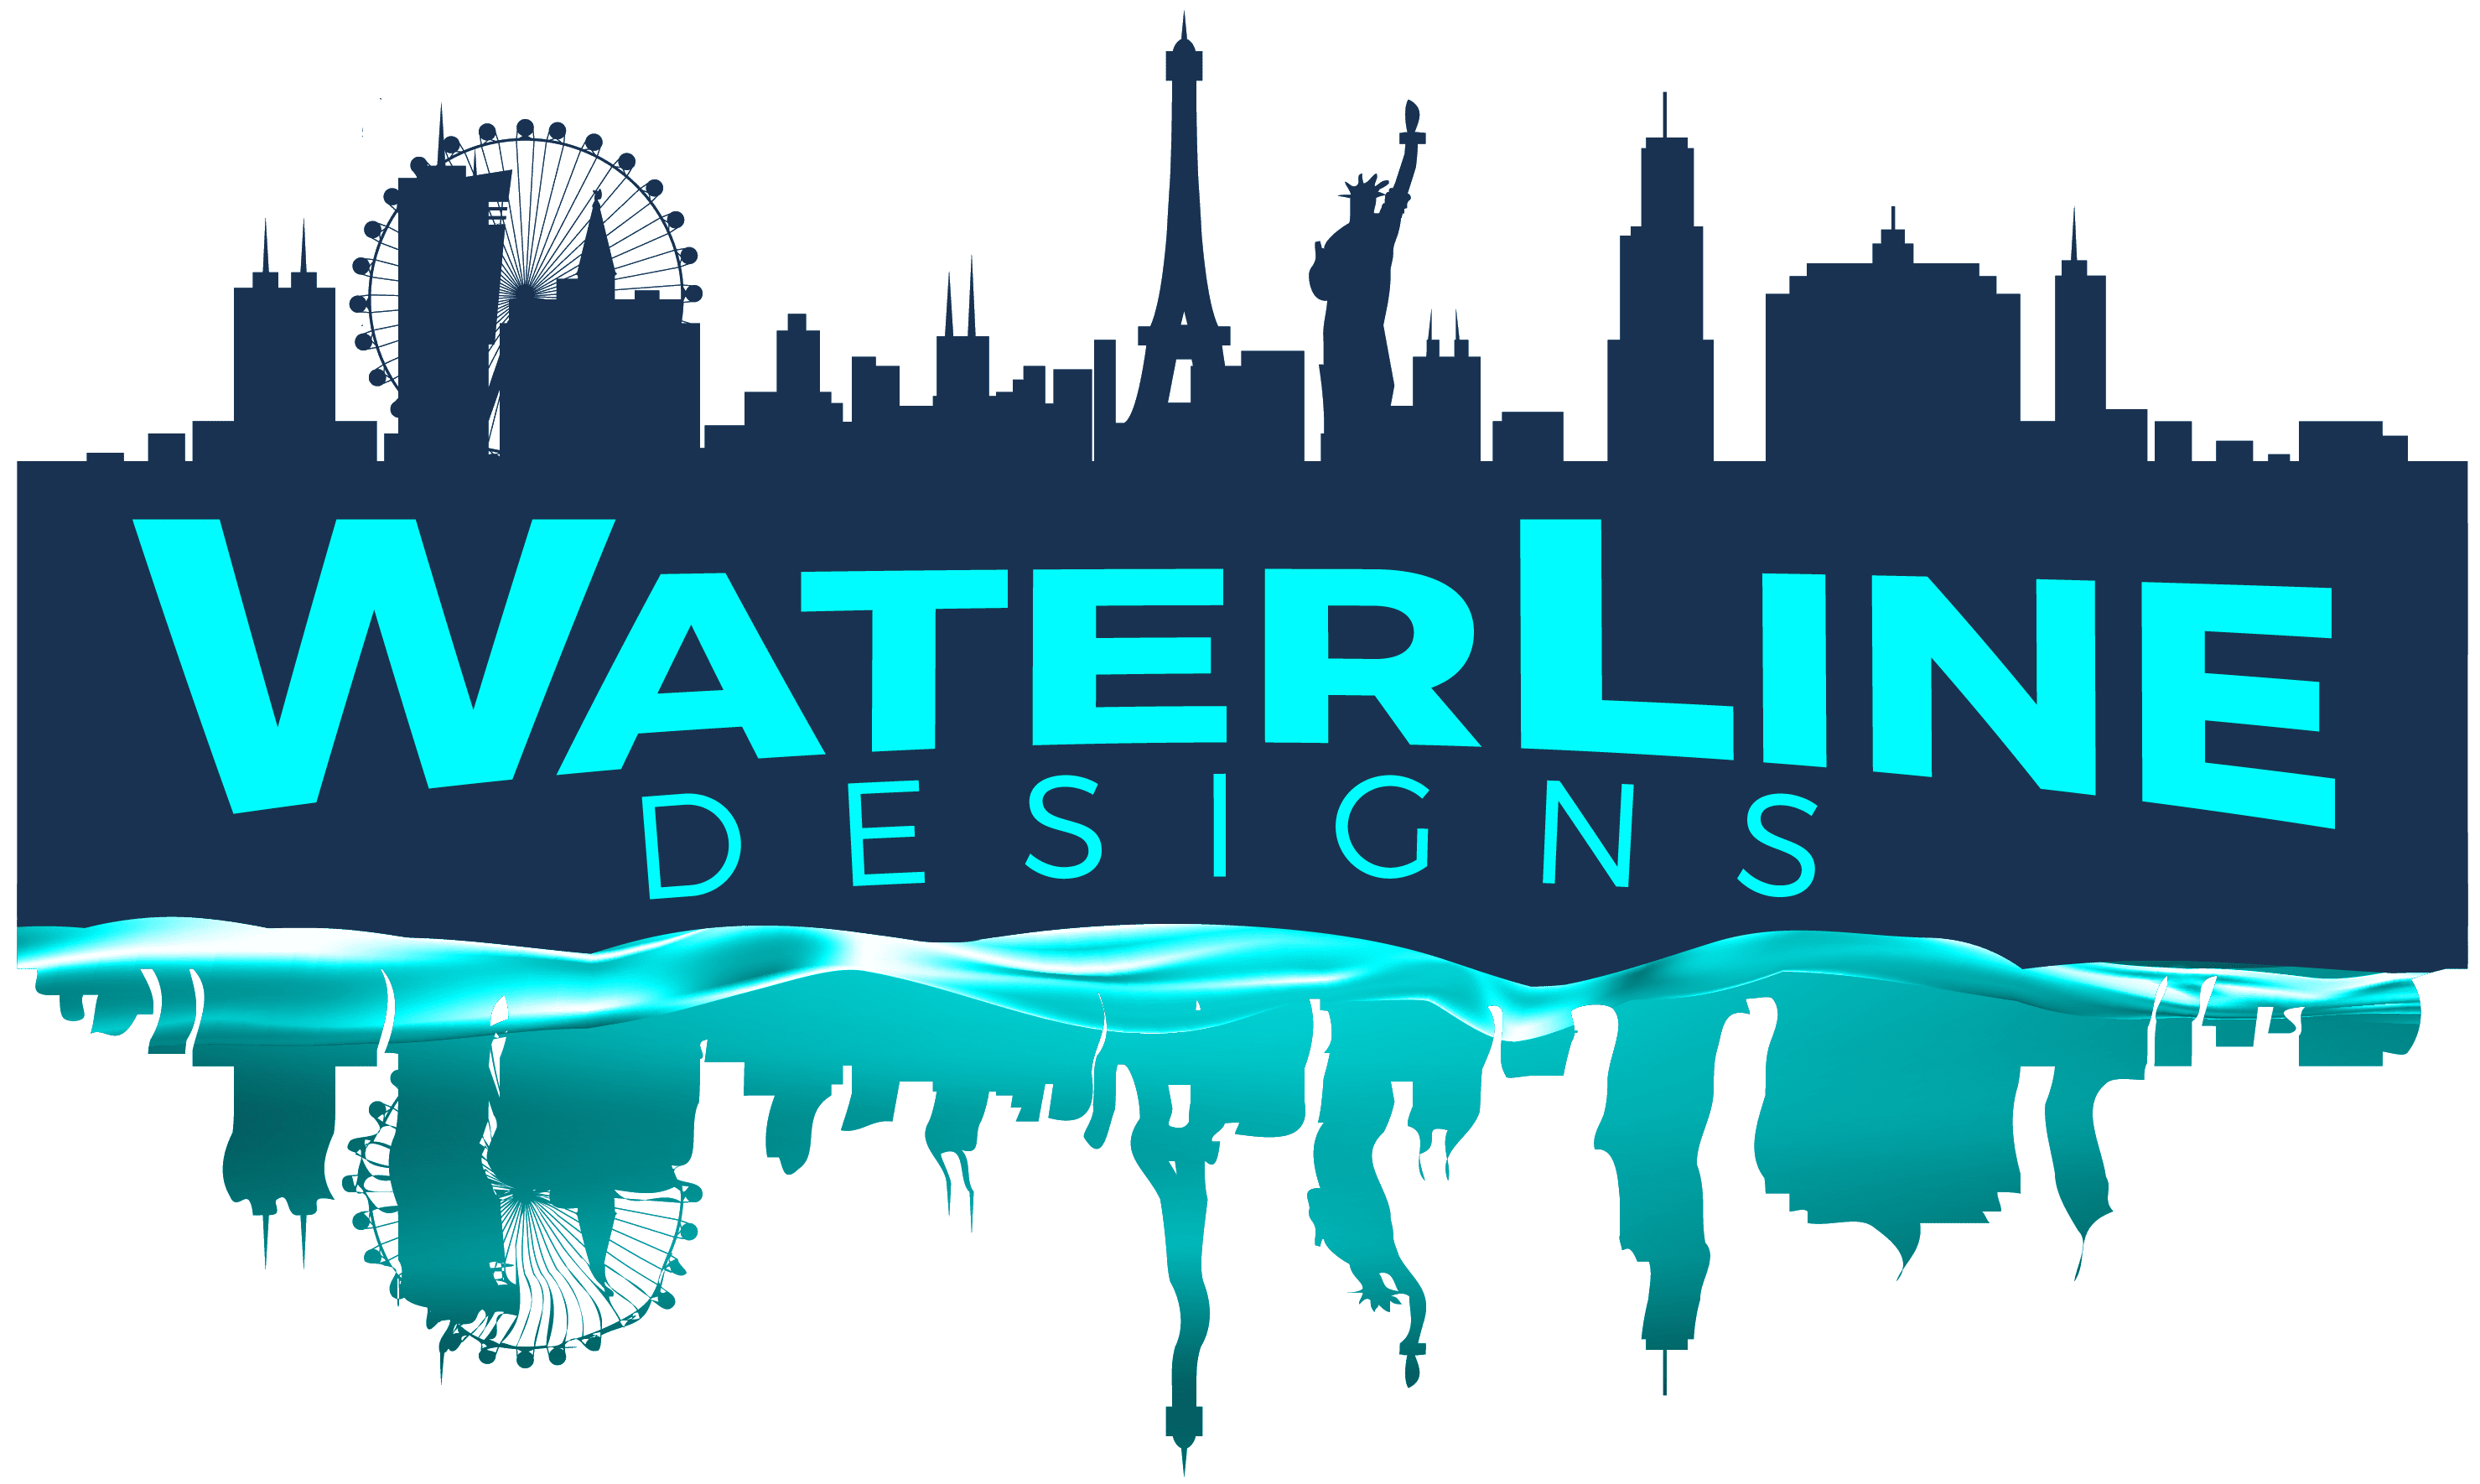 A logo of waterline designs with the city skyline in the background.